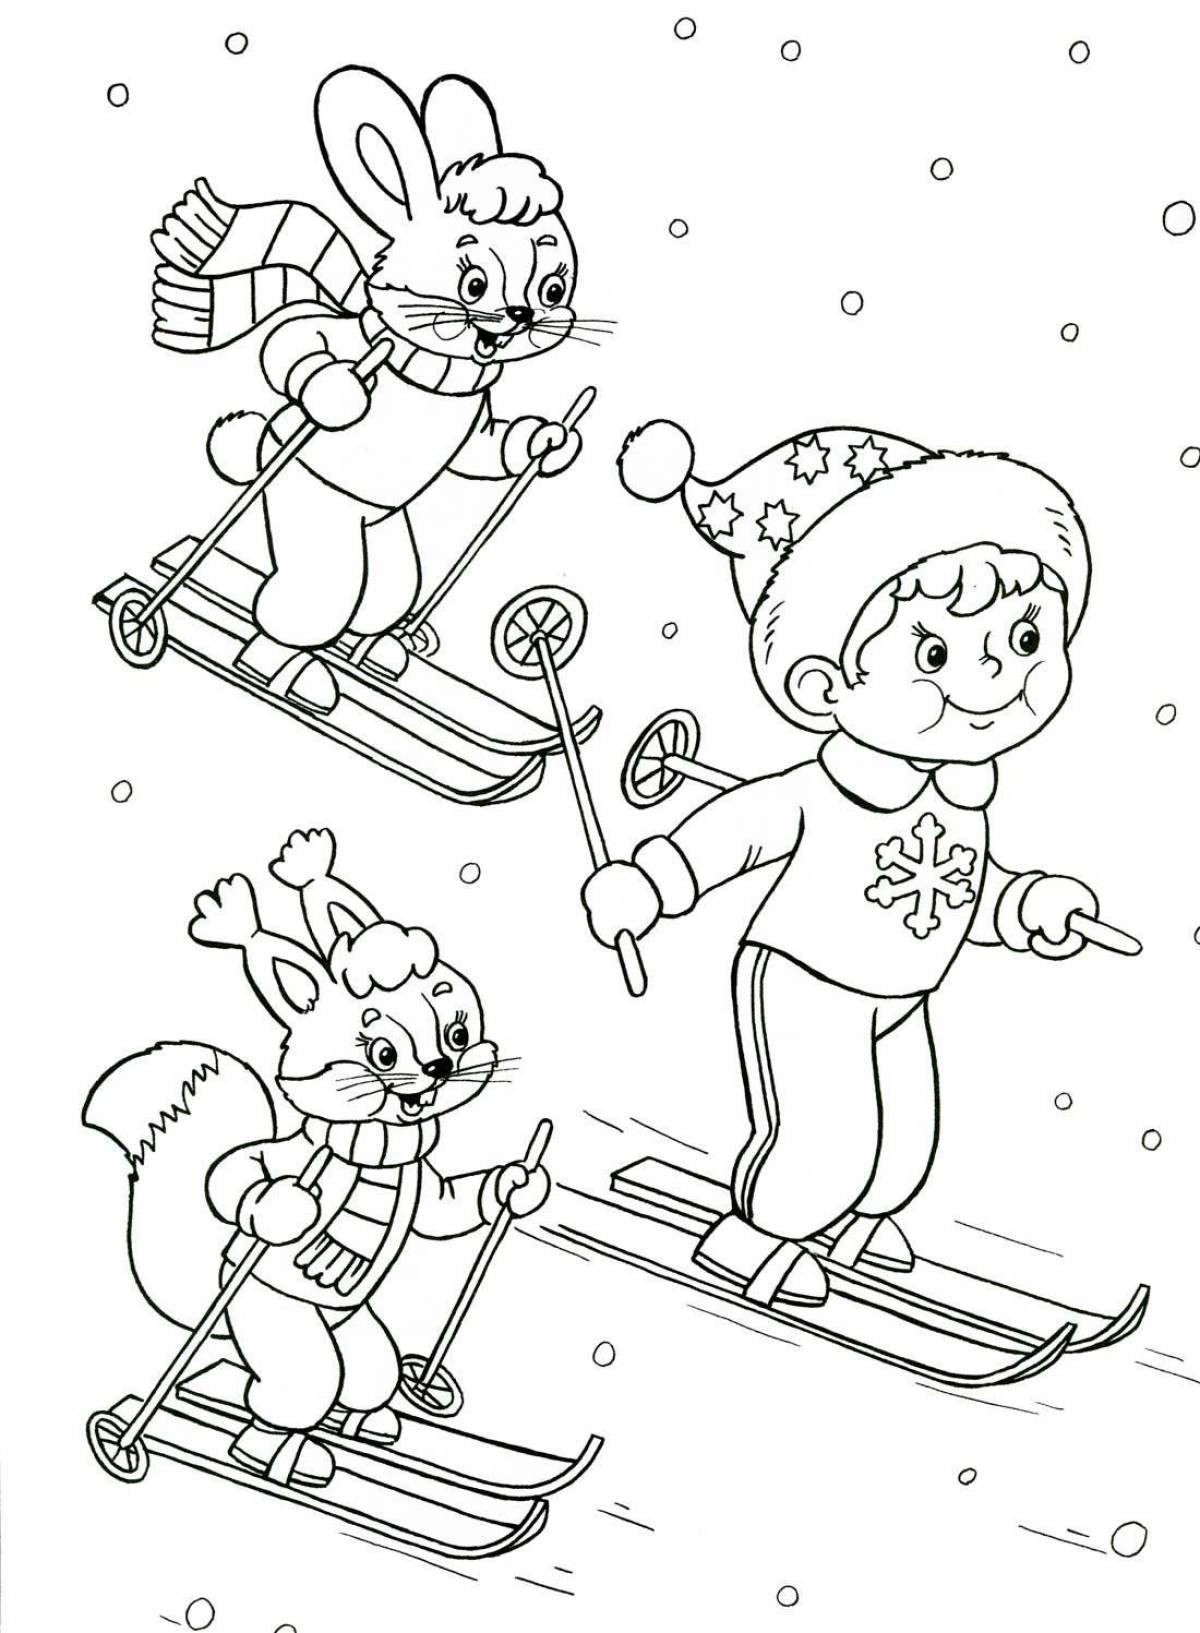 Sparkling winter sports coloring book for 5-6 year olds